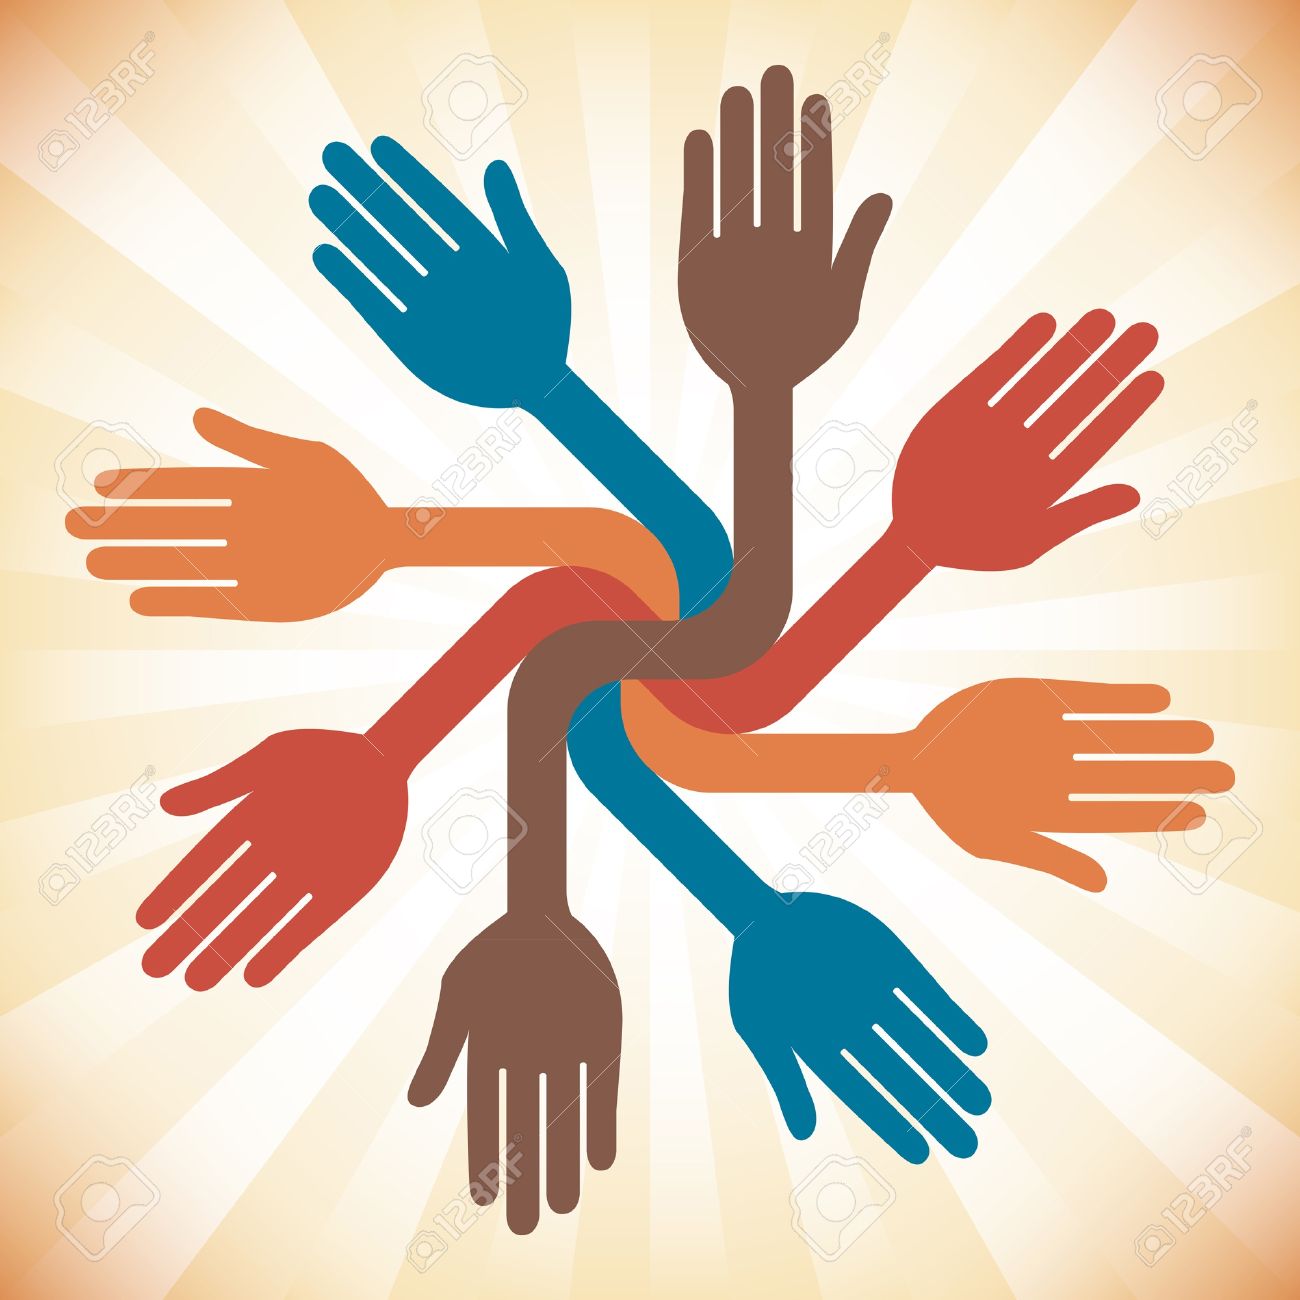 Free clipart of people working together